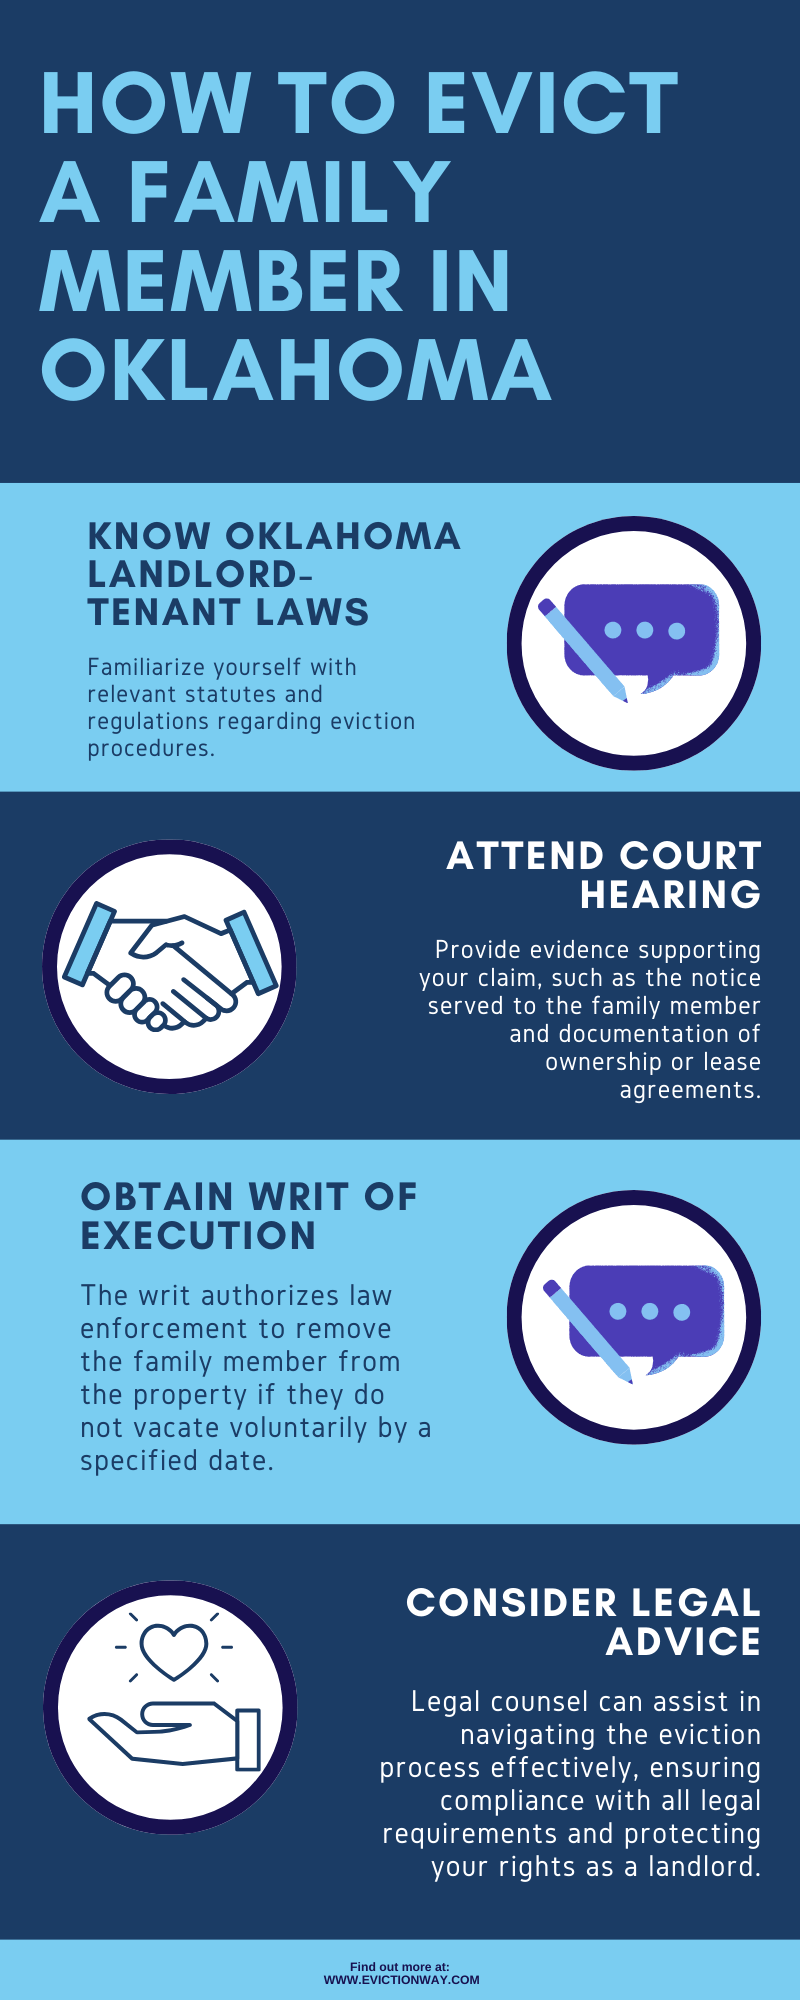 How to Evict a Family Member in Oklahoma